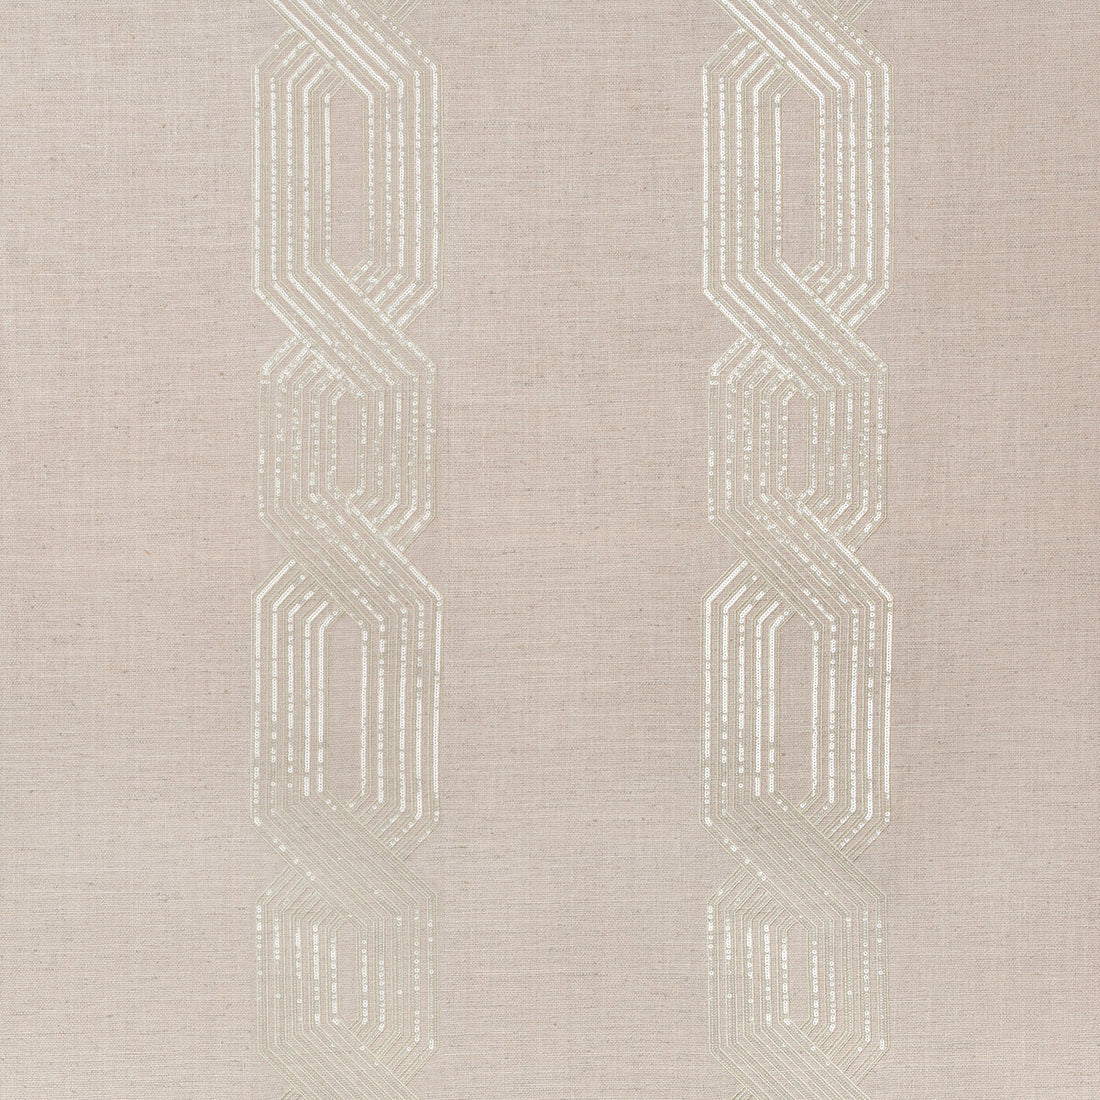 Metalwork fabric in shell color - pattern 4792.112.0 - by Kravet Couture in the Windsor Smith Naila collection